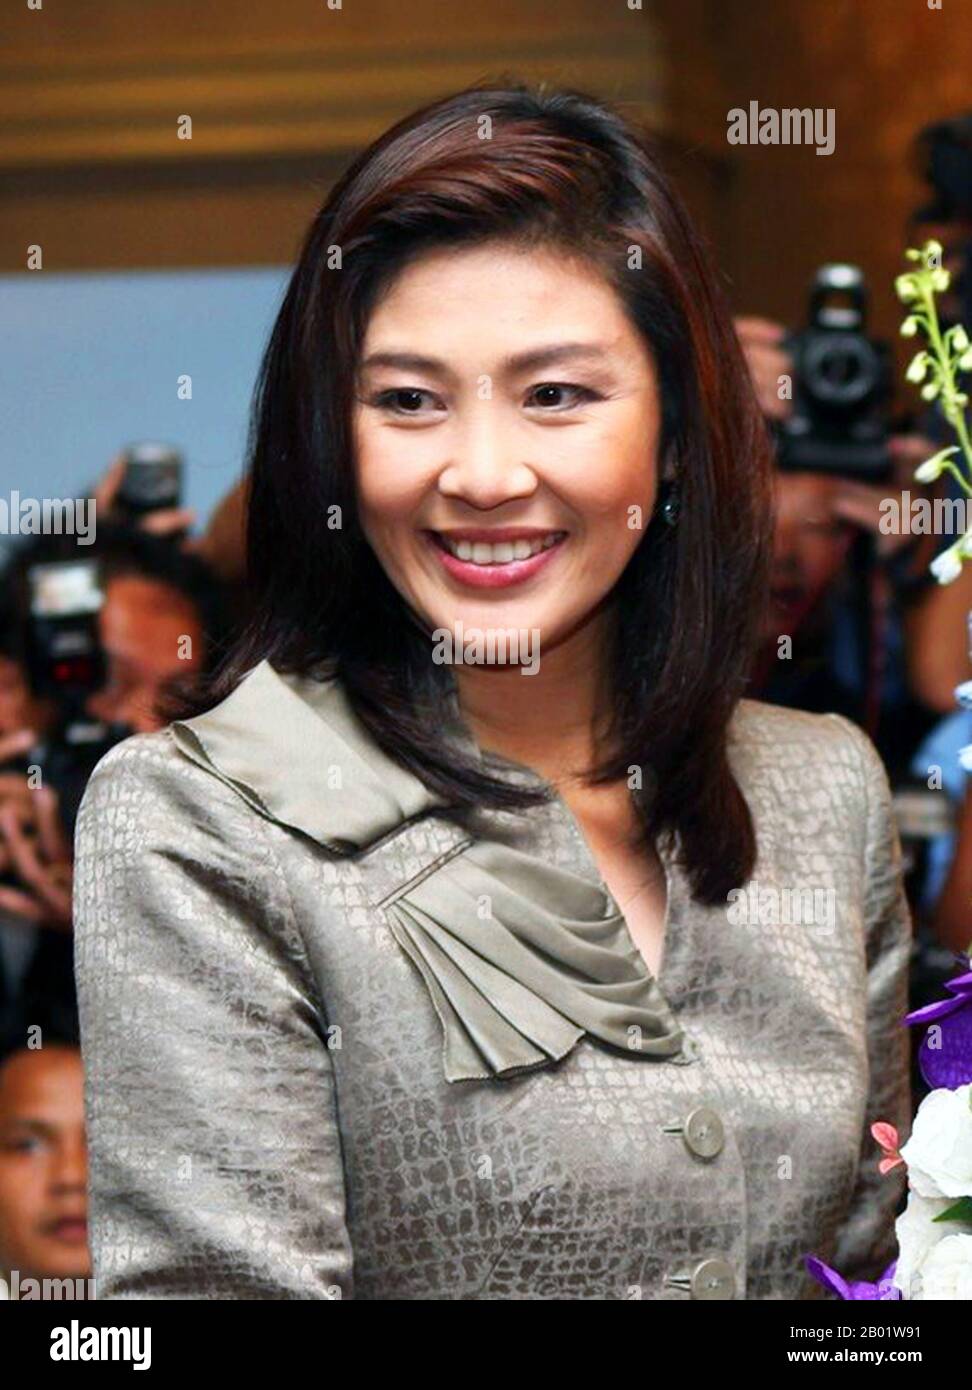 Yingluck Shinawatra (ยิ่งลักษณ์ ชินวัตร, RTGS: Yinglak Chinnawat, born 21 June 1967) is a Thai politician, figurehead of the Pheu Thai Party, and Prime Minister of Thailand following the 2011 general election.  Born in Chiang Mai, Yingluck Shinawatra earned a bachelors degree from Chiang Mai University and a masters degree from Kentucky State University, both in public administration. She became an executive in the businesses founded by her elder brother, Thaksin Shinawatra, and later became the president of property developer SC Asset and managing director of Advanced Info Service. Meanwhile, Stock Photo